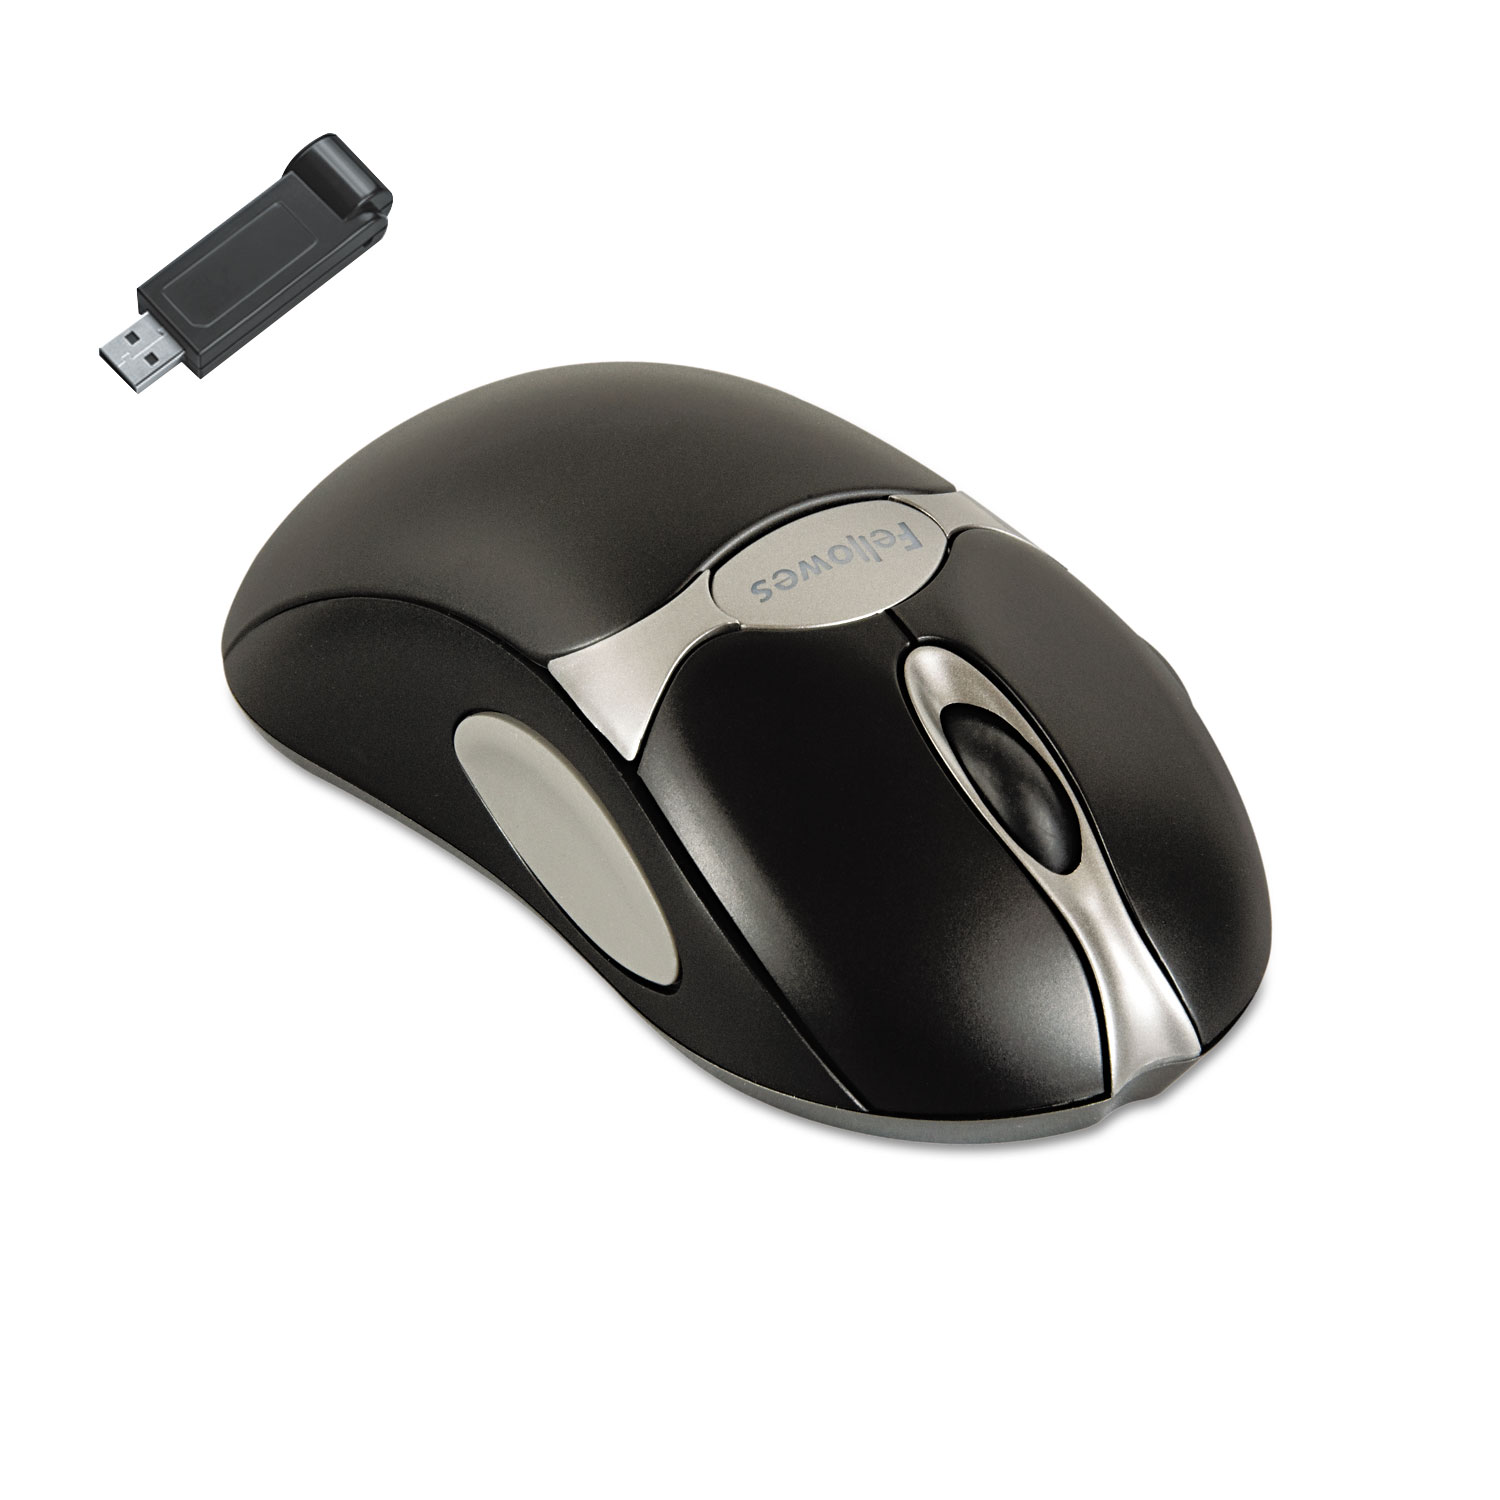  Fellowes 98912 Microban Cordless Five-Button Optical Mouse, 2.4 GHz Frequency/19 ft Wireless Range, Left/Right Hand Use, Black/Silver (FEL98912) 